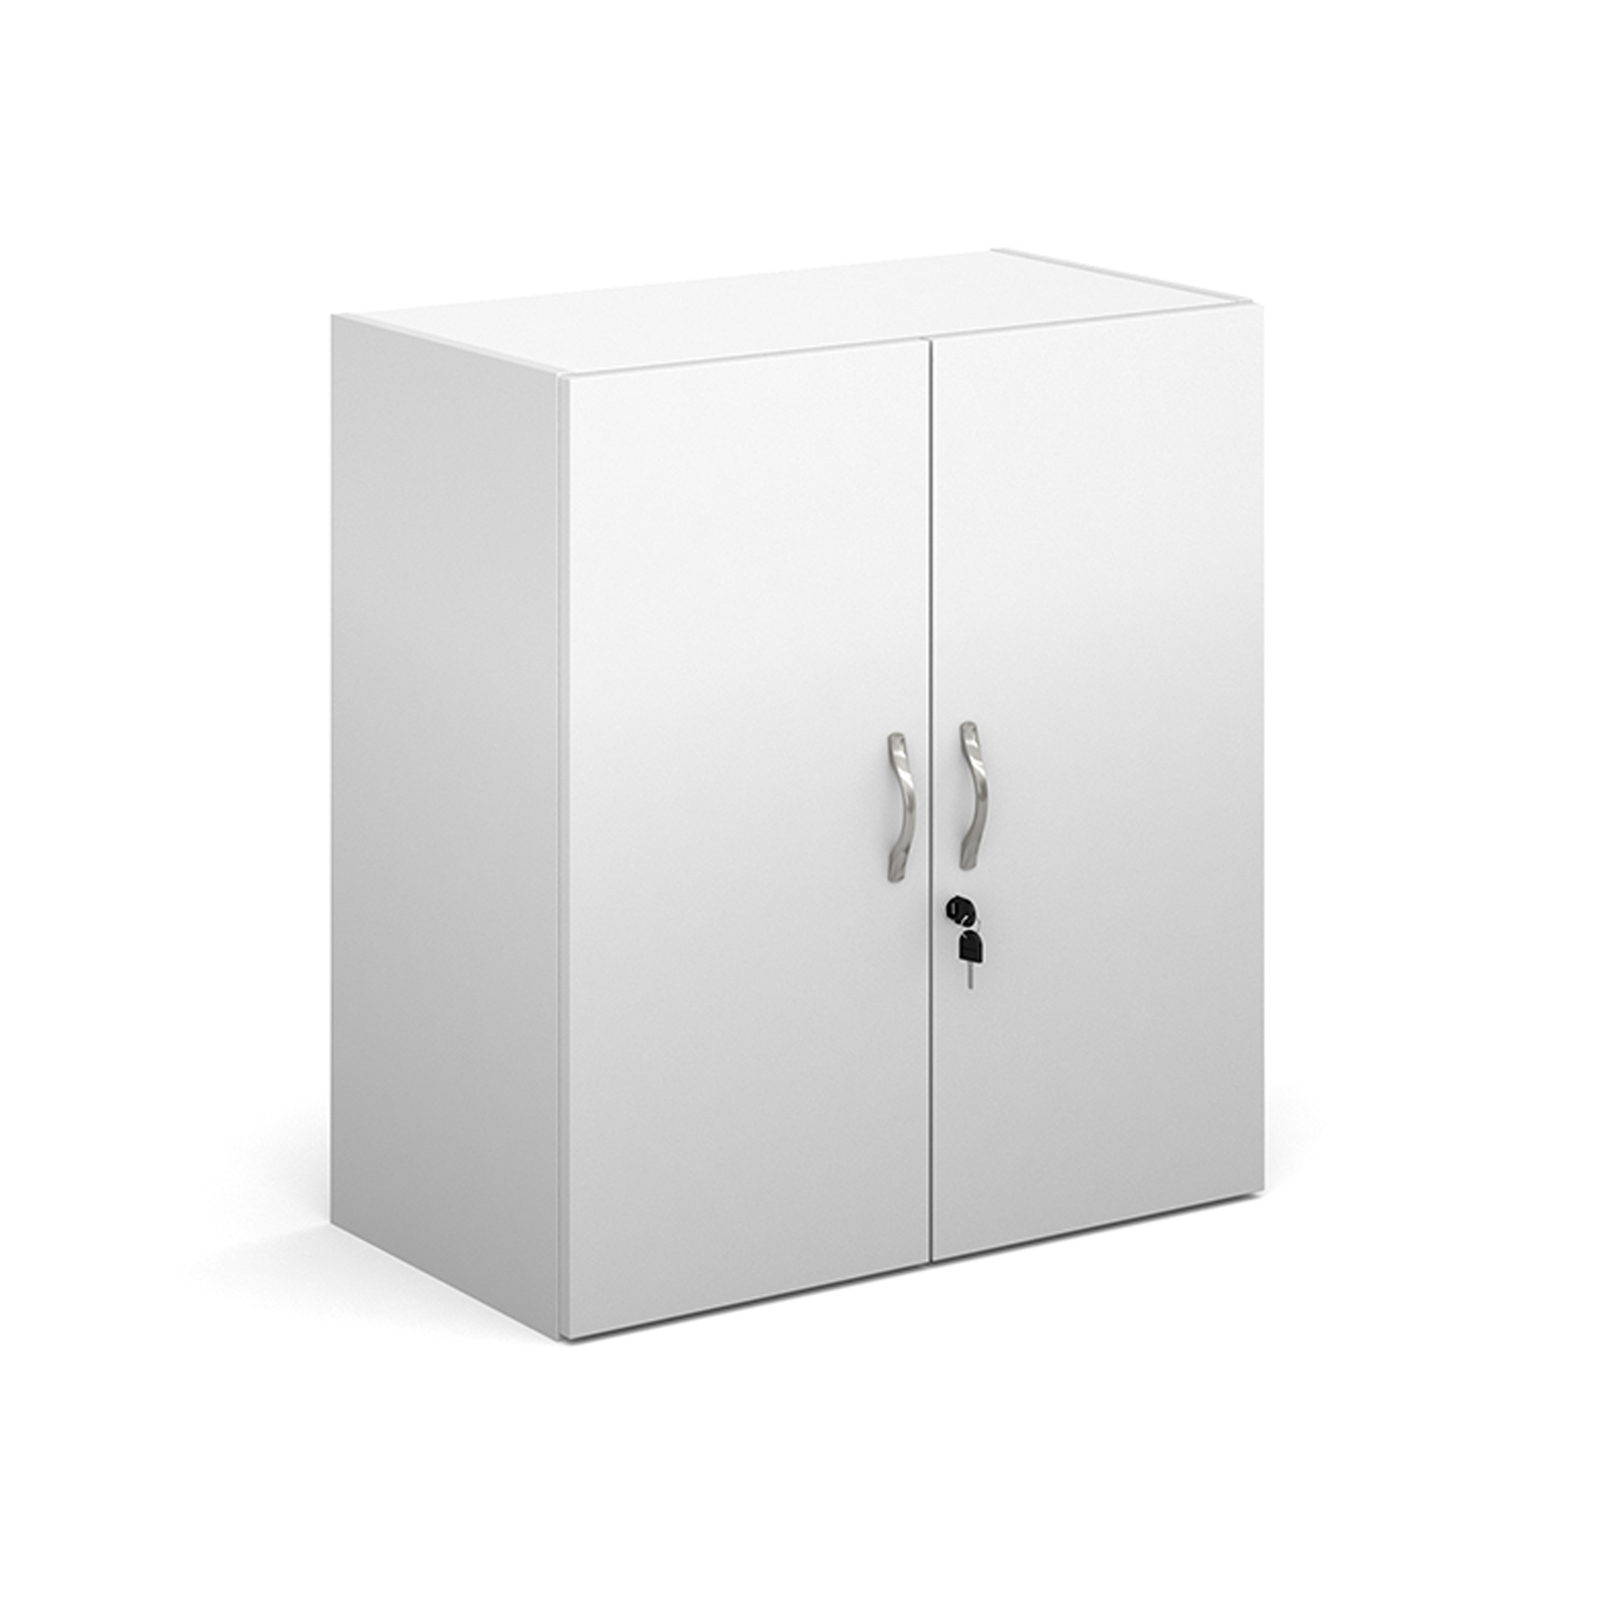 Up to 1200mm High Contract double door cupboard 830mm high with 1 shelf - white